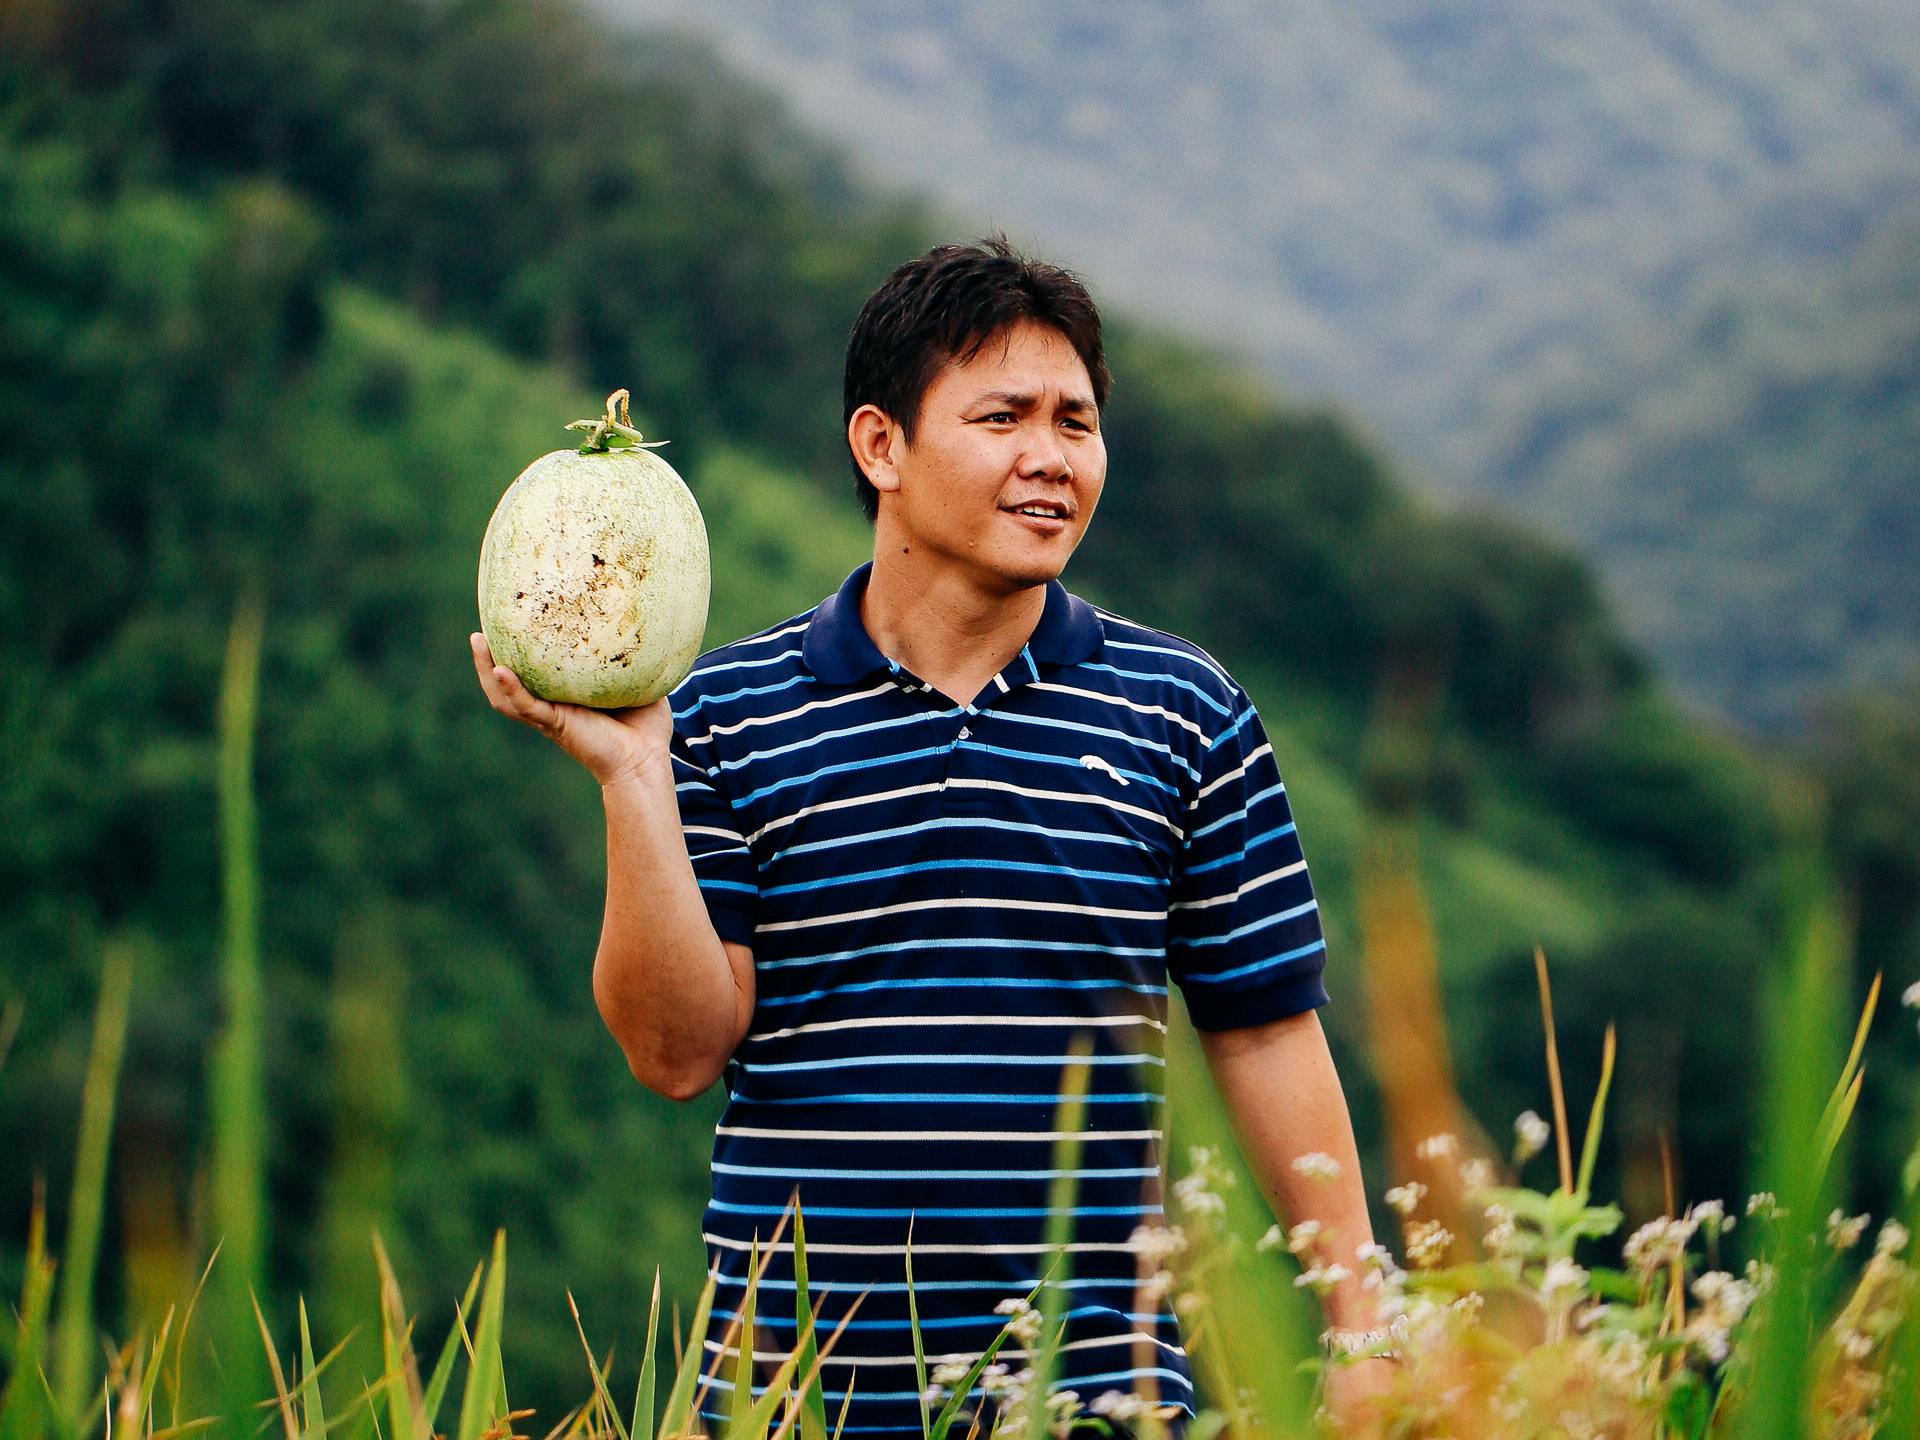 A man standing in a large dield with mountains in the background, holding a large fruit.